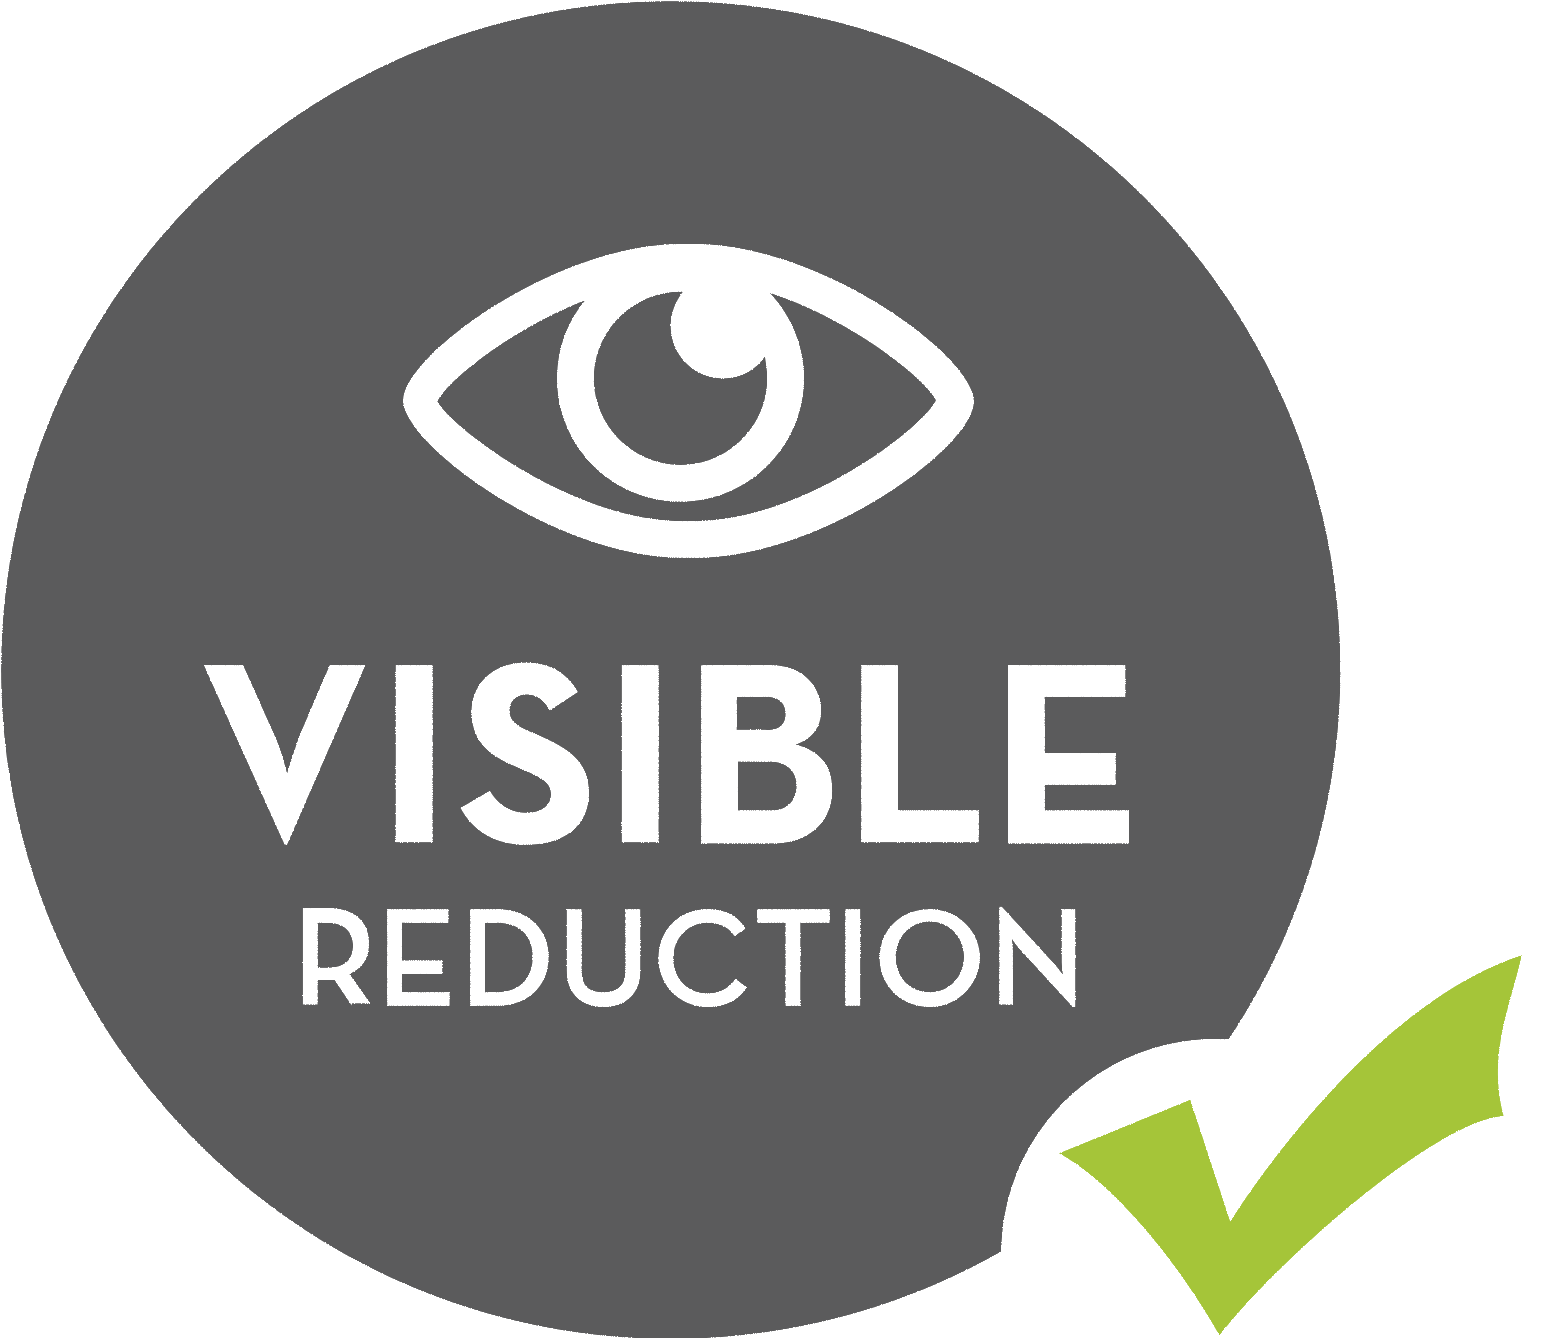 Visible Reduction